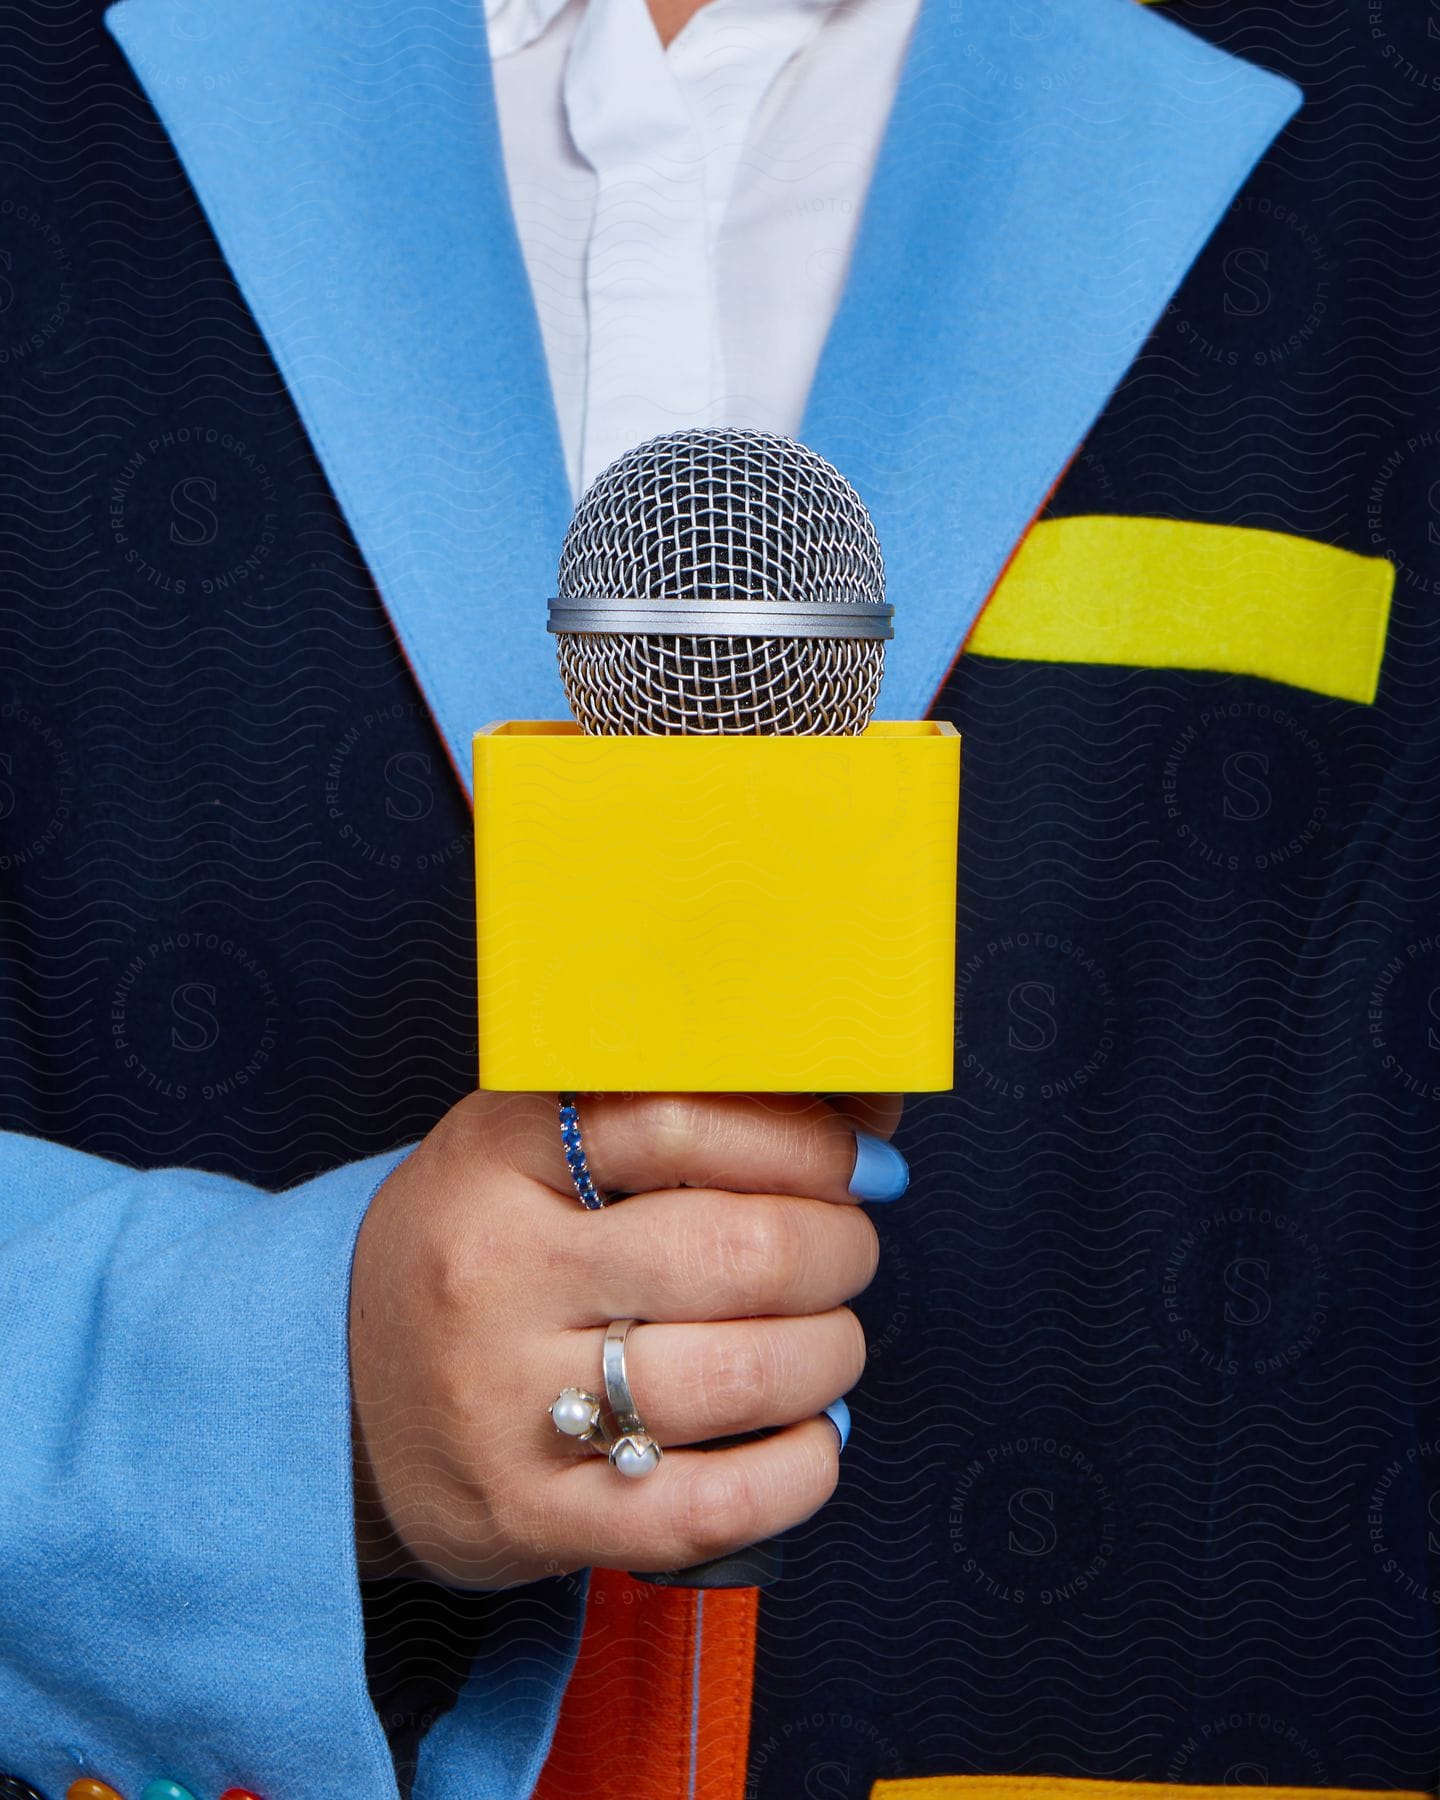 Close-up shot of a woman's hand, clad in a blue blazer jacket and white shirt, holding a yellow microphone